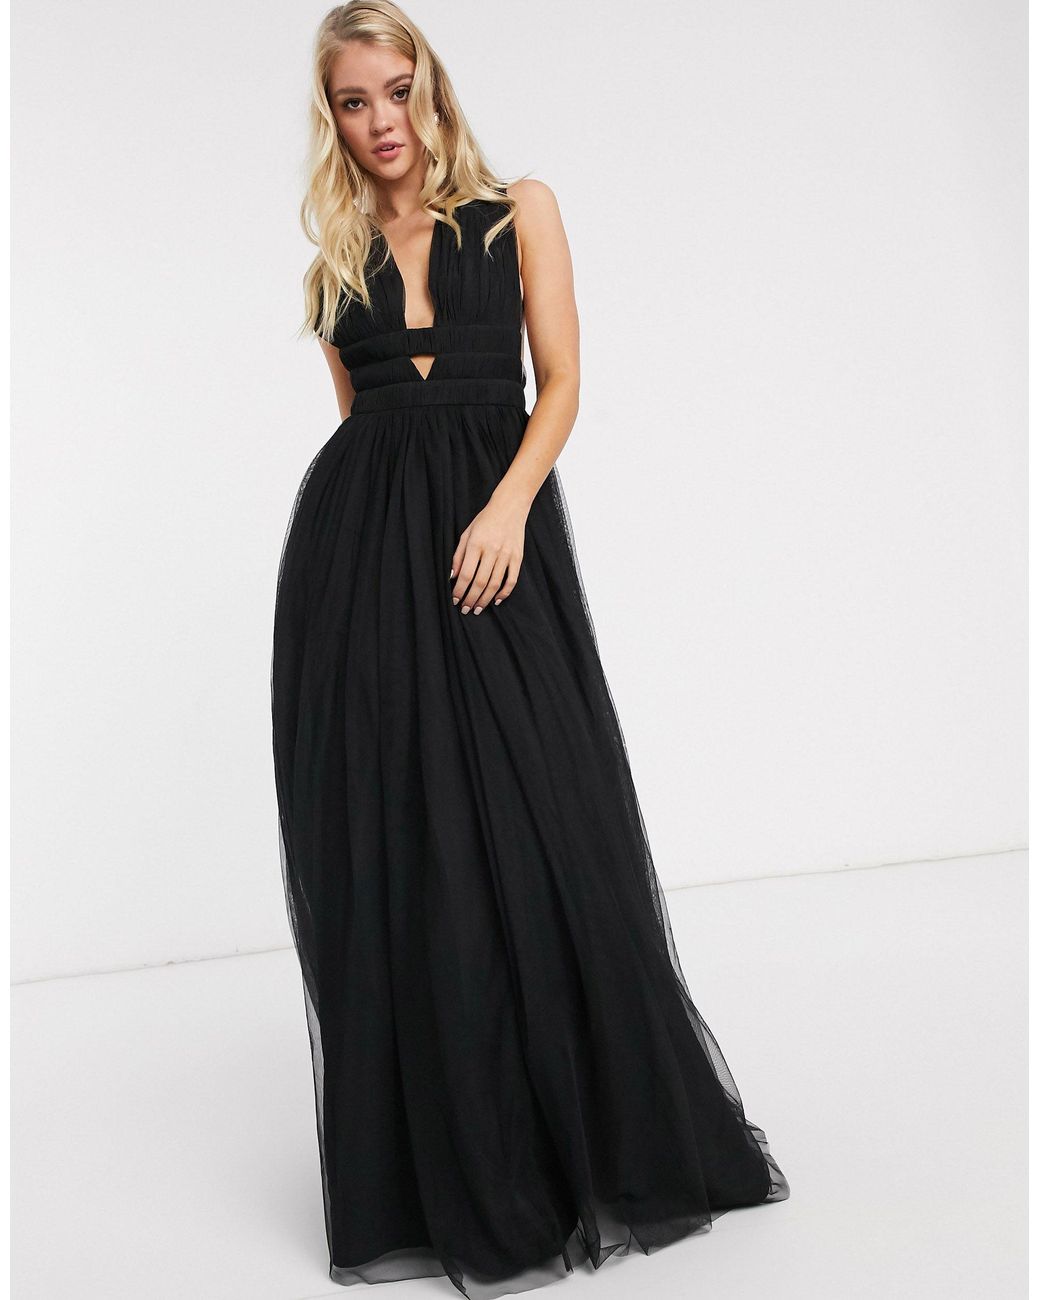 ASOS Plunge Tiered Grecian Tulle Maxi Dress in Black | Lyst